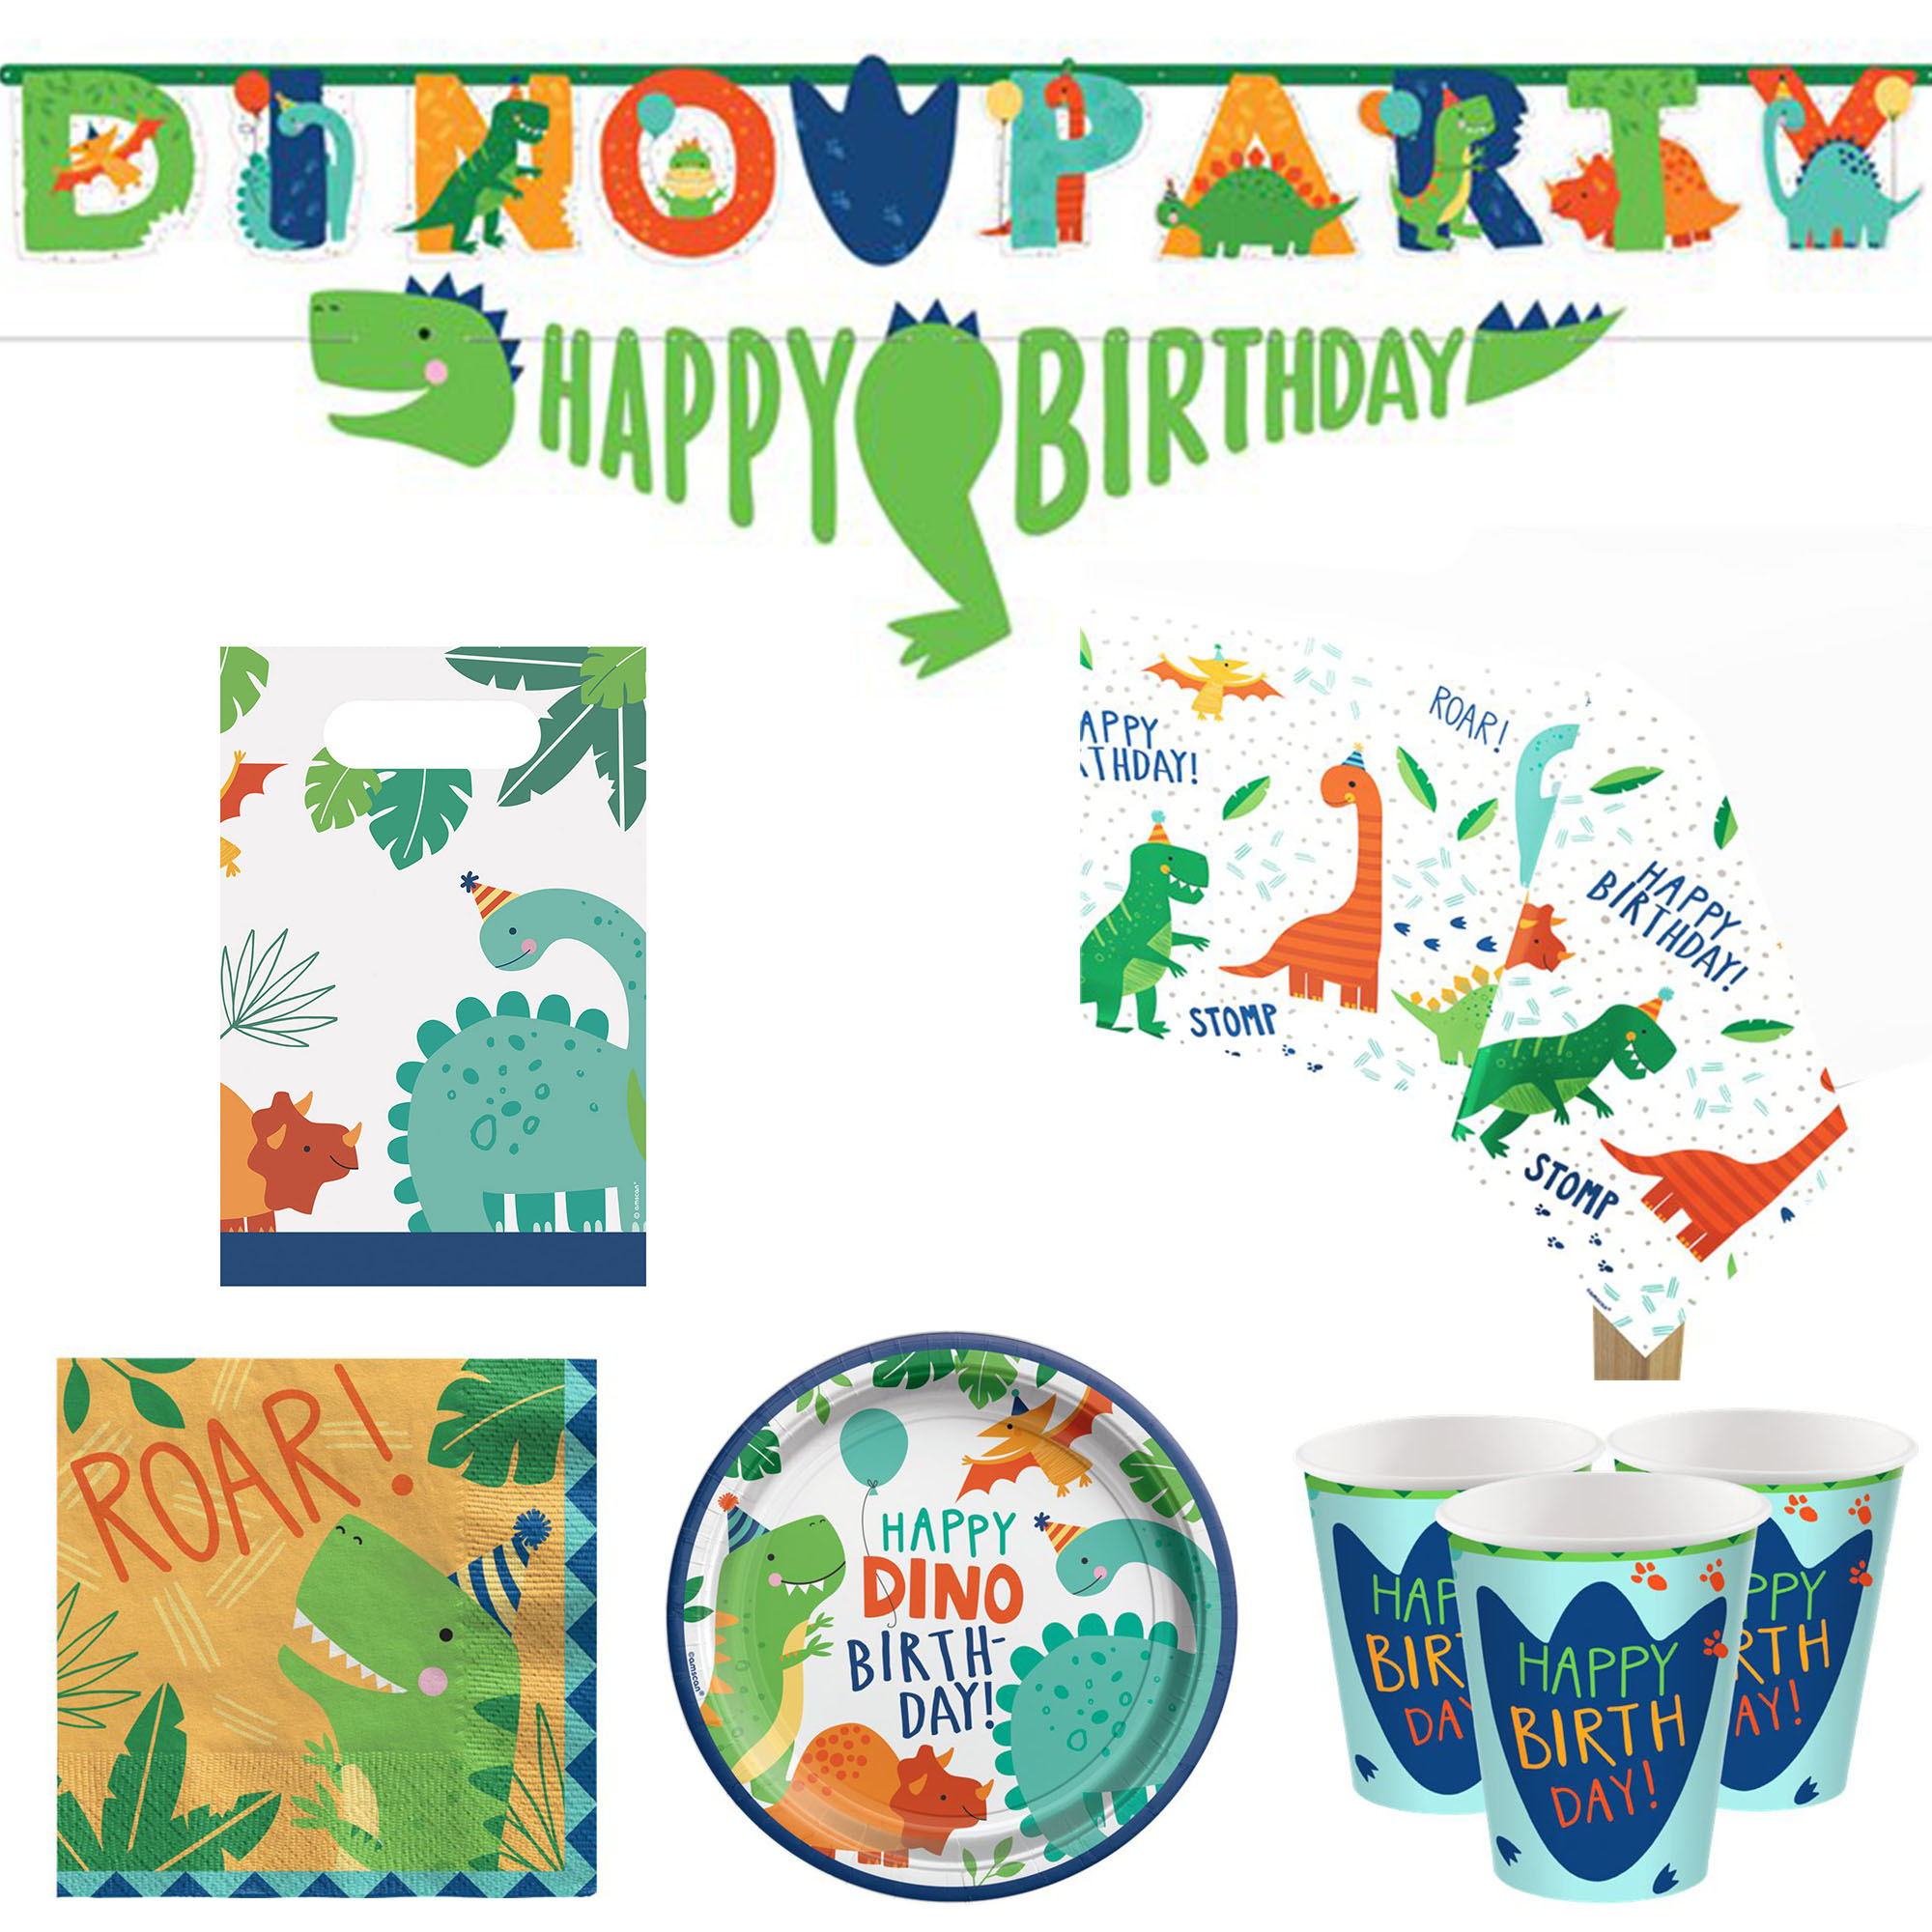 Buy Dino-Mite Birthday Party Tableware & Decorations Bundle - 16 Guests for GBP 15.99